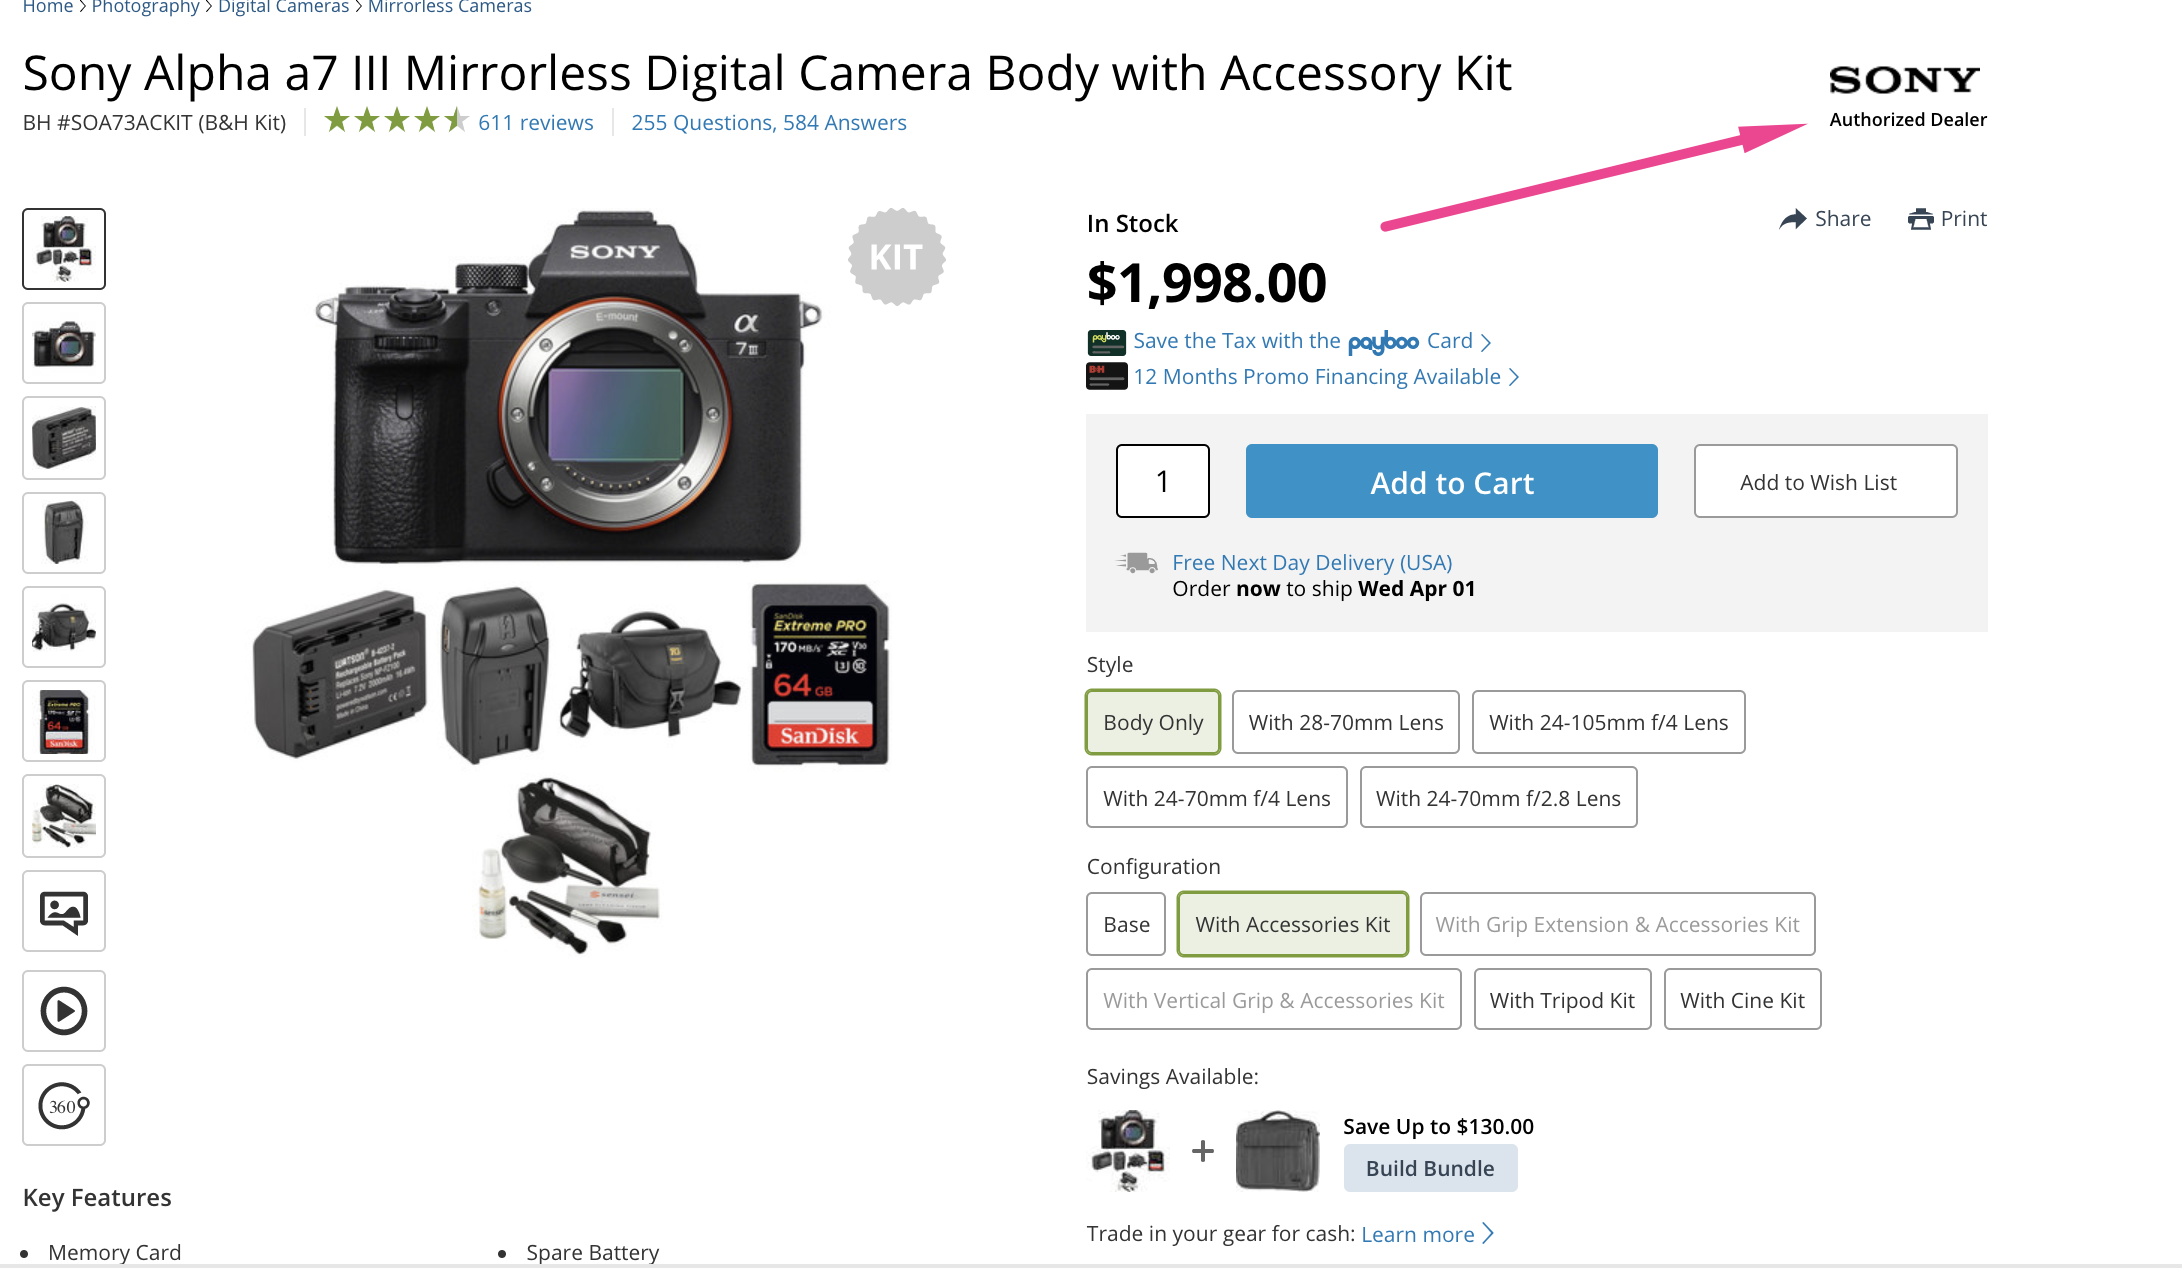 B&H Website Experience Review - WeSupply | Labs